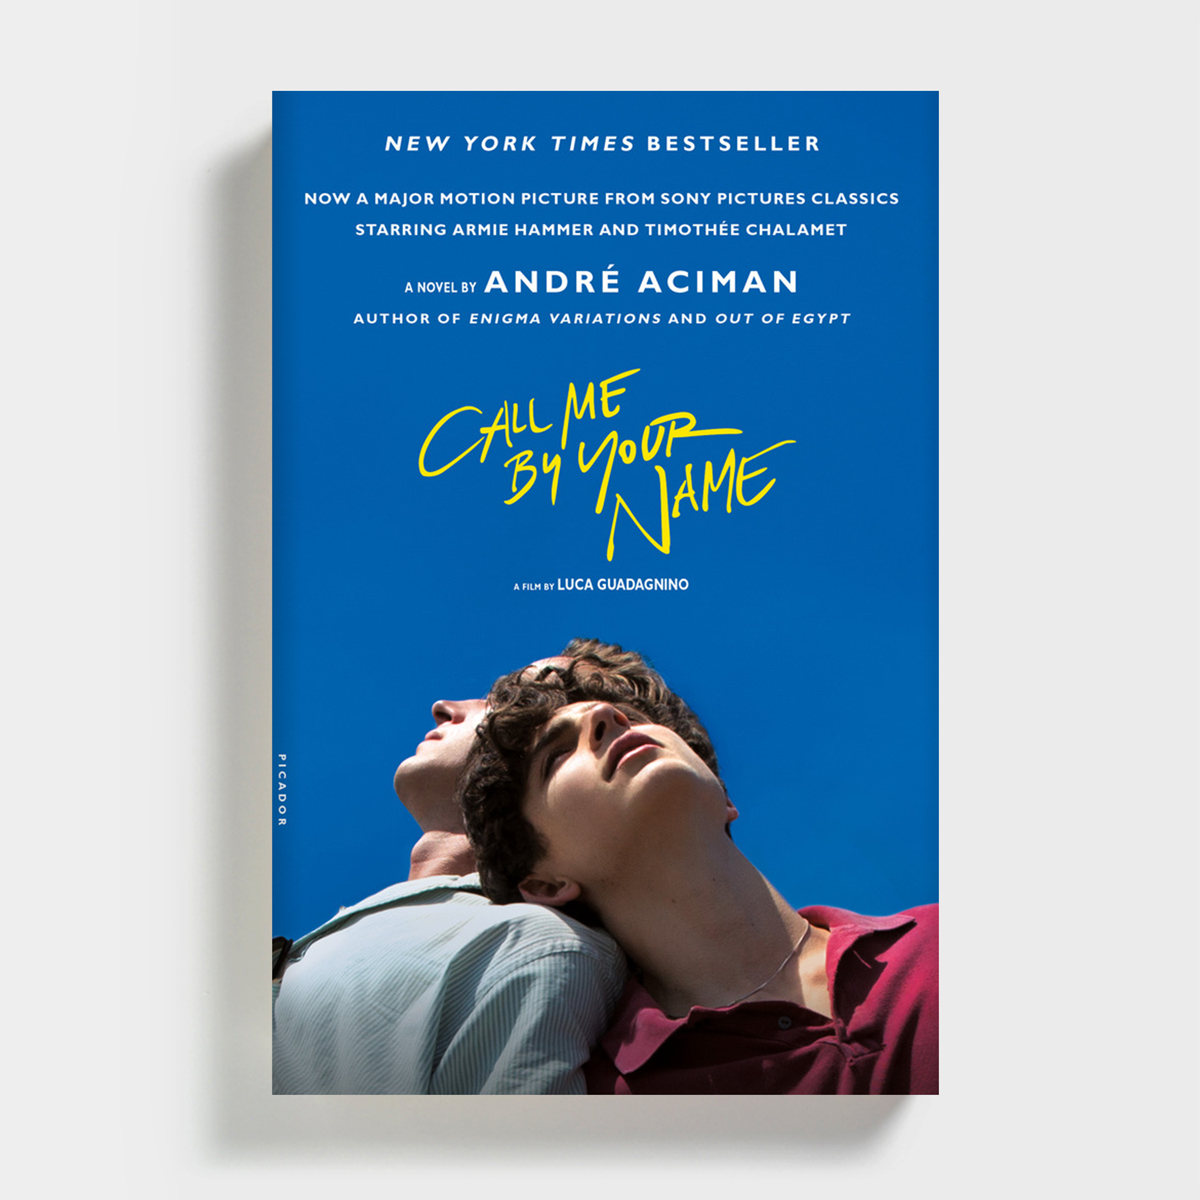 Call Me by Your Name by Andre Aciman Work in Progress.